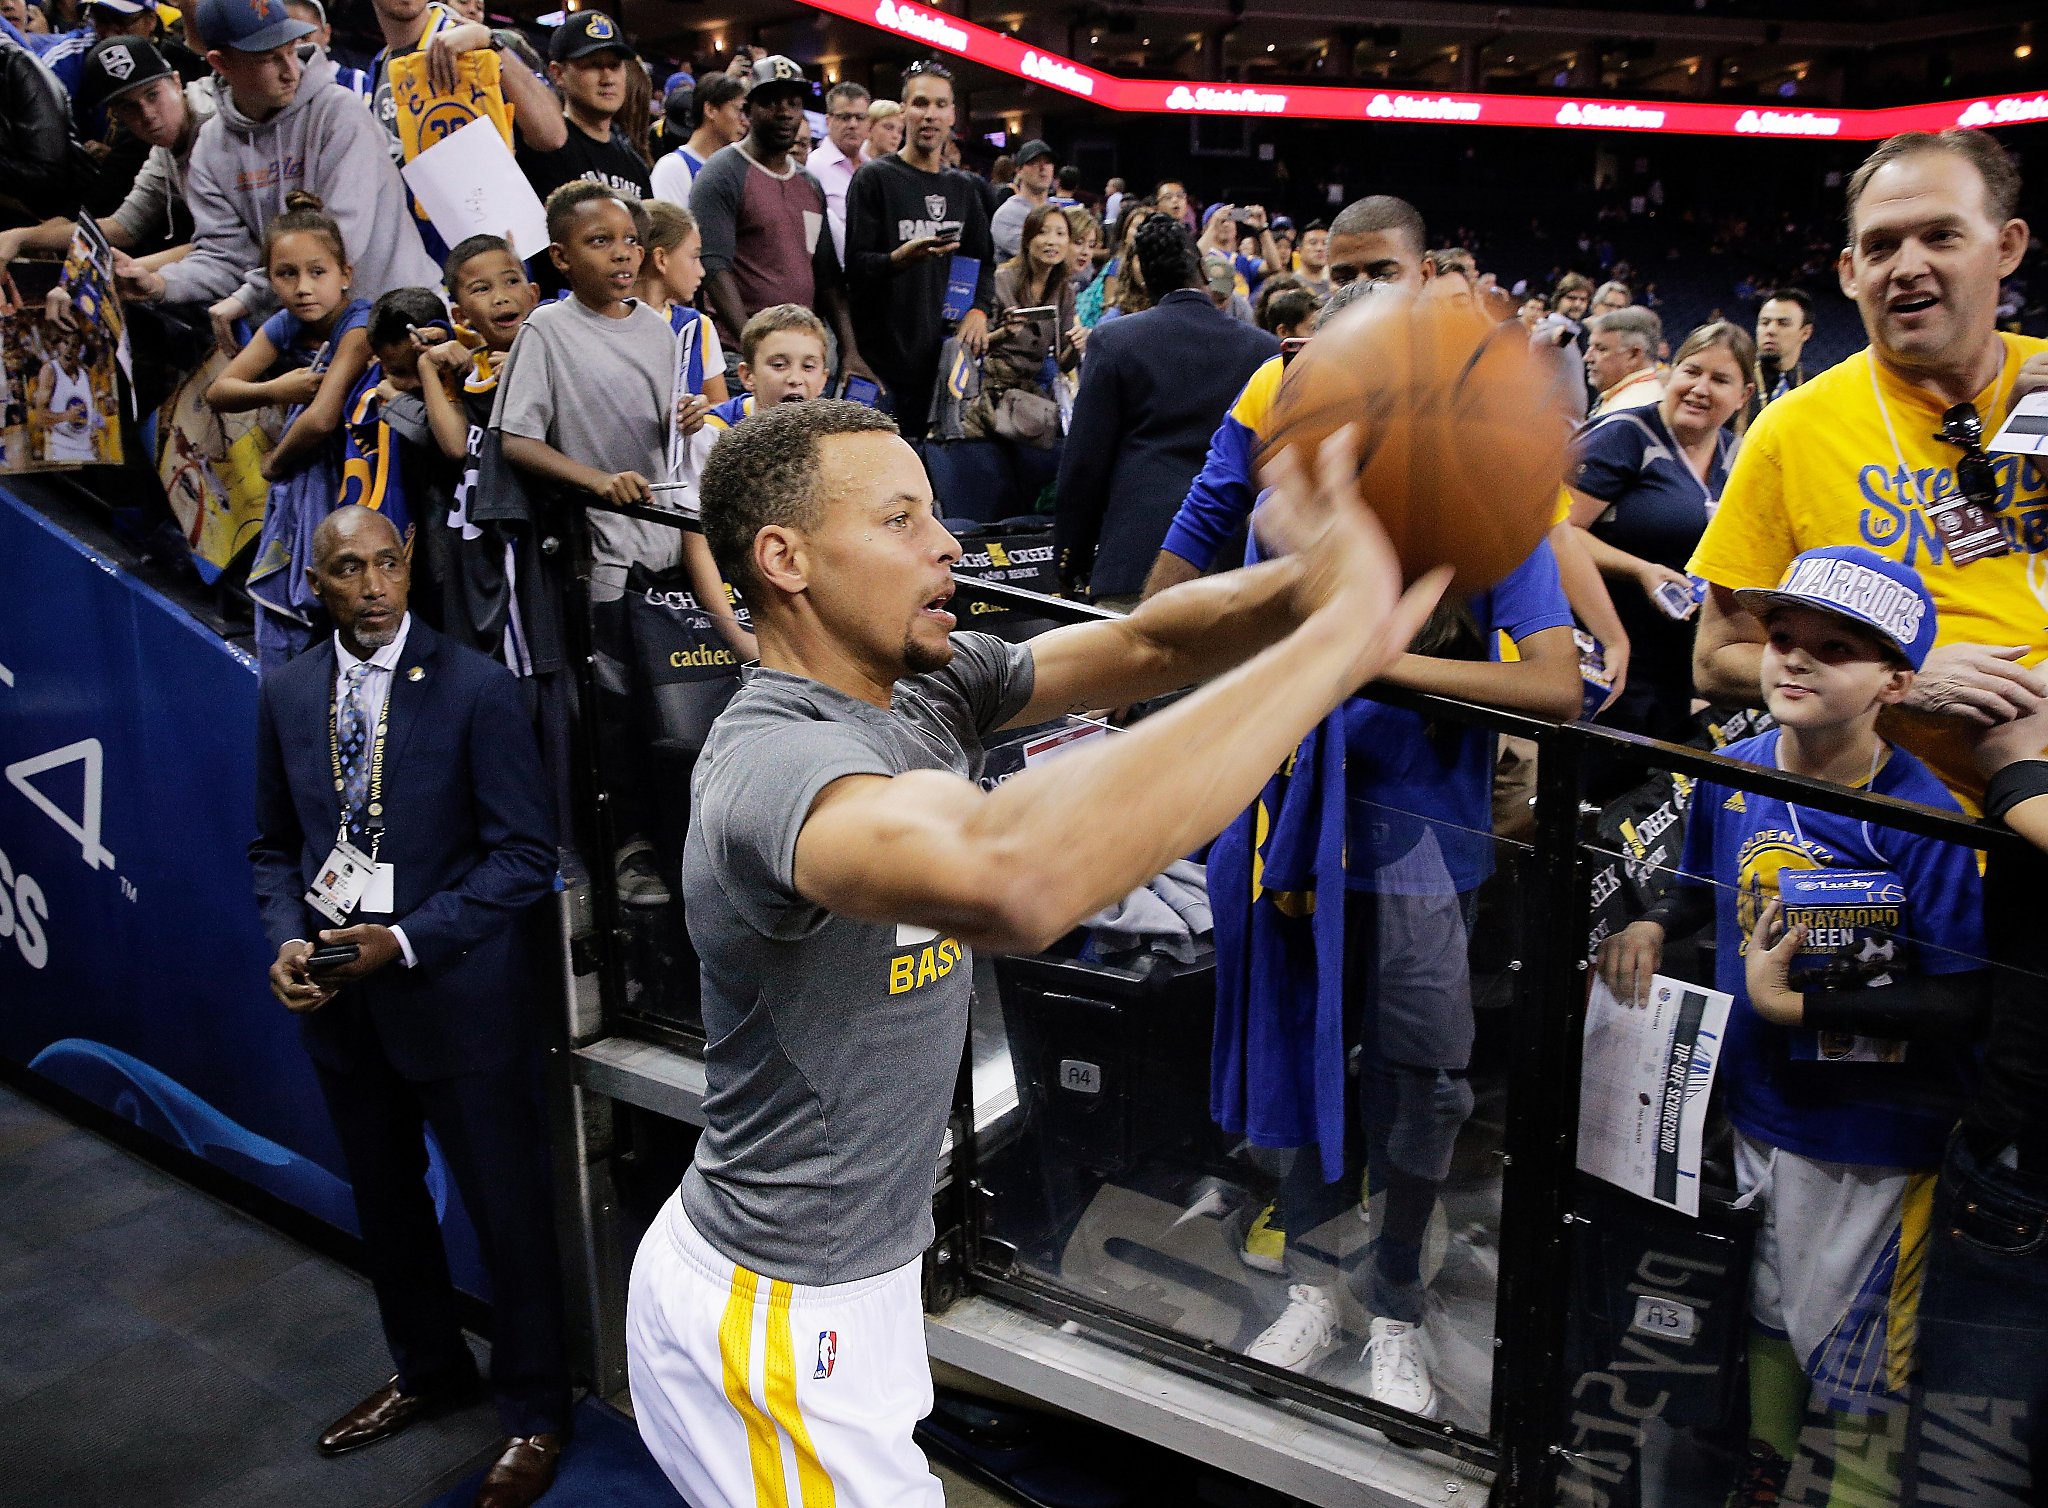 Steph Curry shows up to Game 5 'all business' in a three-piece suit